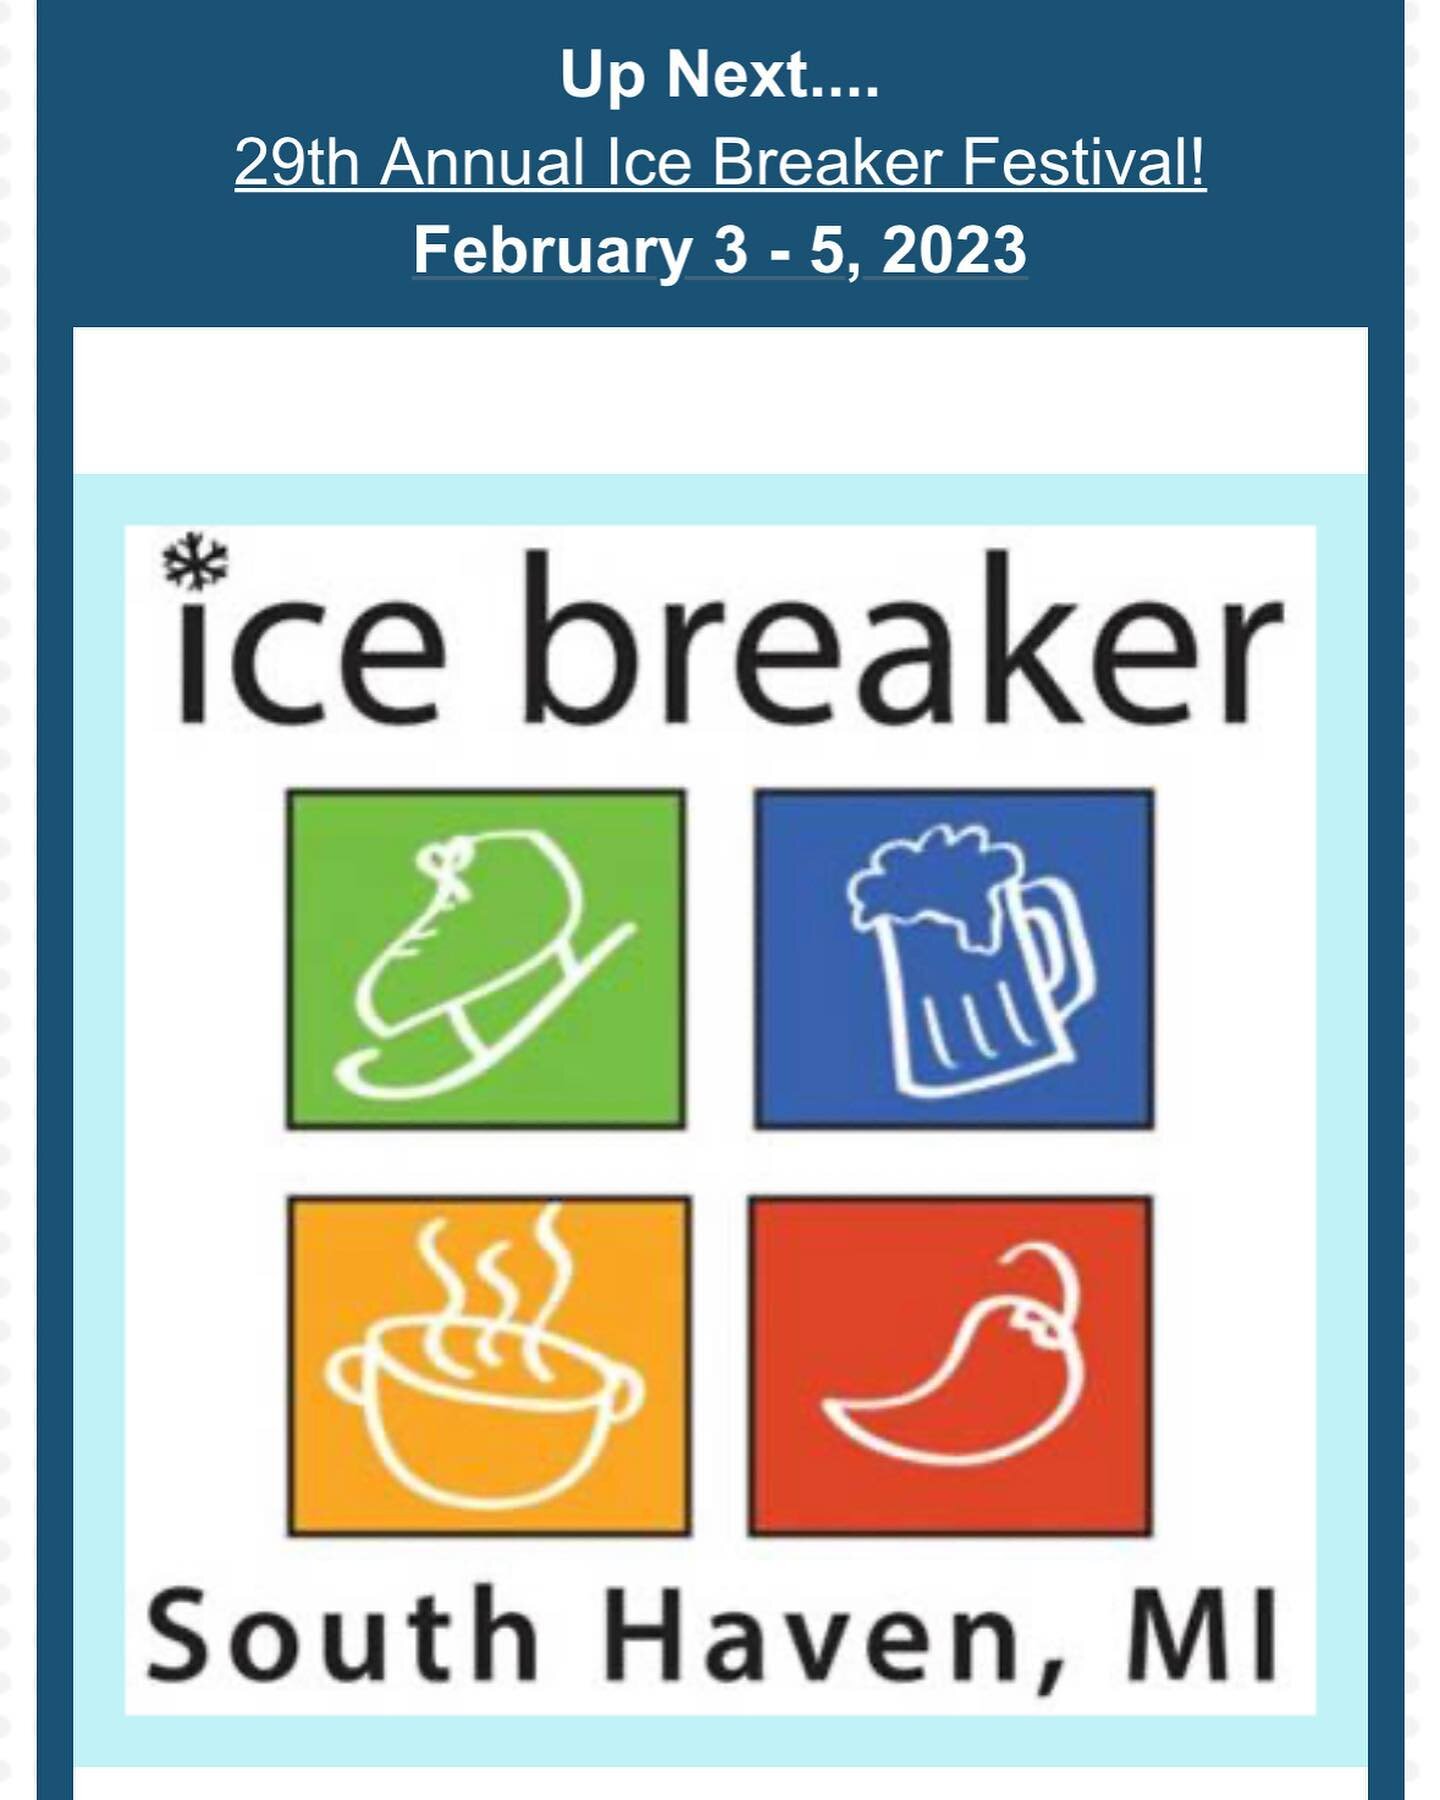 Join in the ice breaker fun!  Book your winter getaway now at www.southhavenking.com